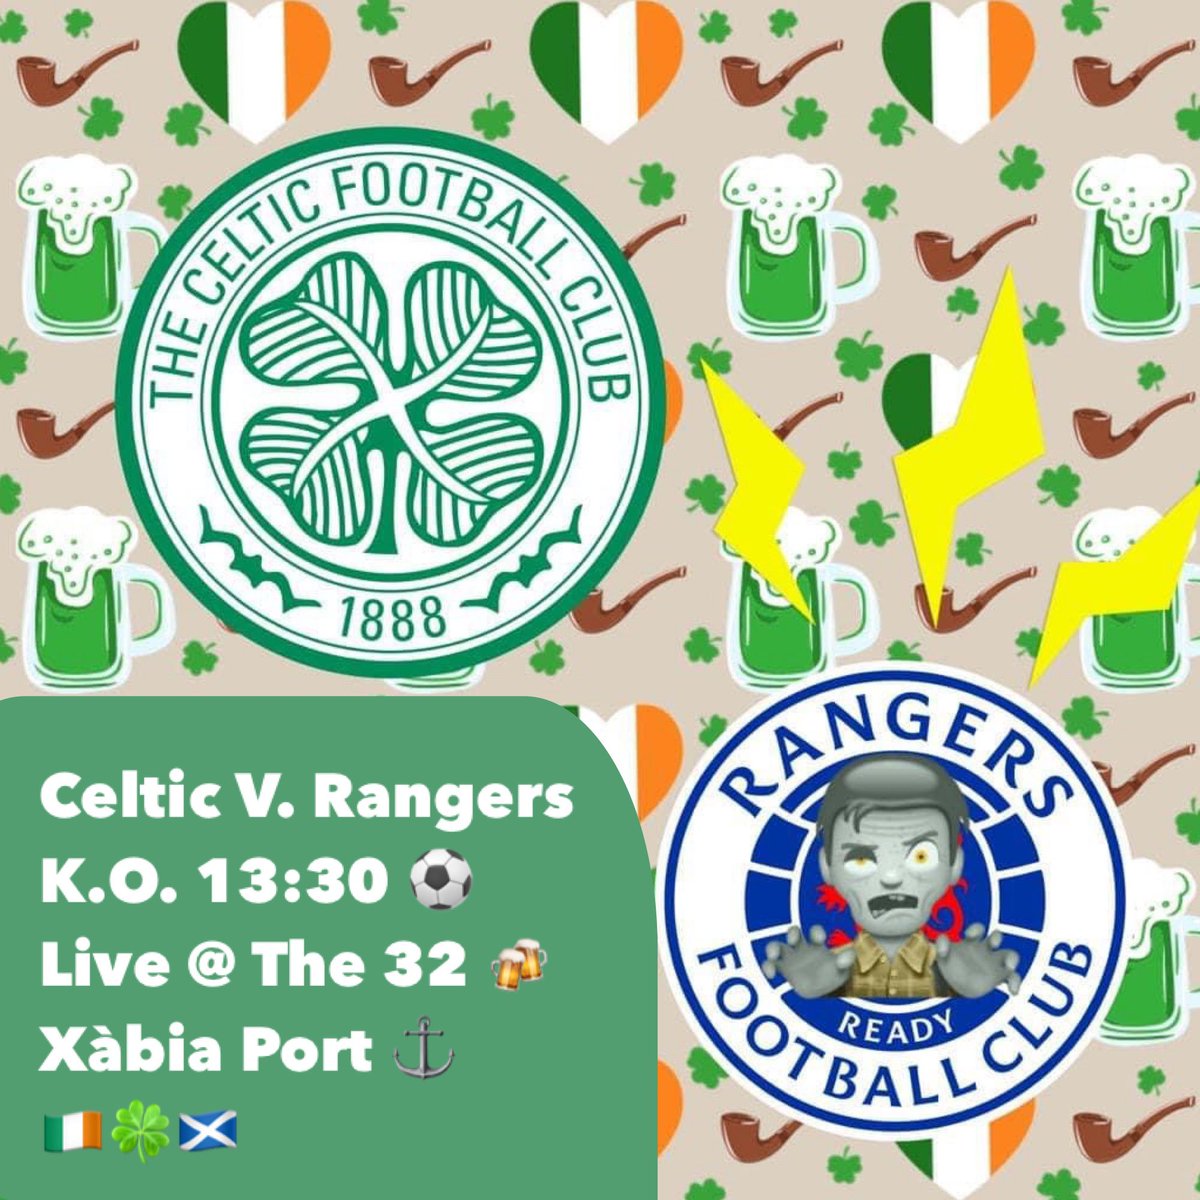 🍀Celtic v Rangers today! Live @ The 32 Bar 🍻 in Xàbia Port ⚓ All welcome! 🇮🇪🍀🏴󠁧󠁢󠁳󠁣󠁴󠁿